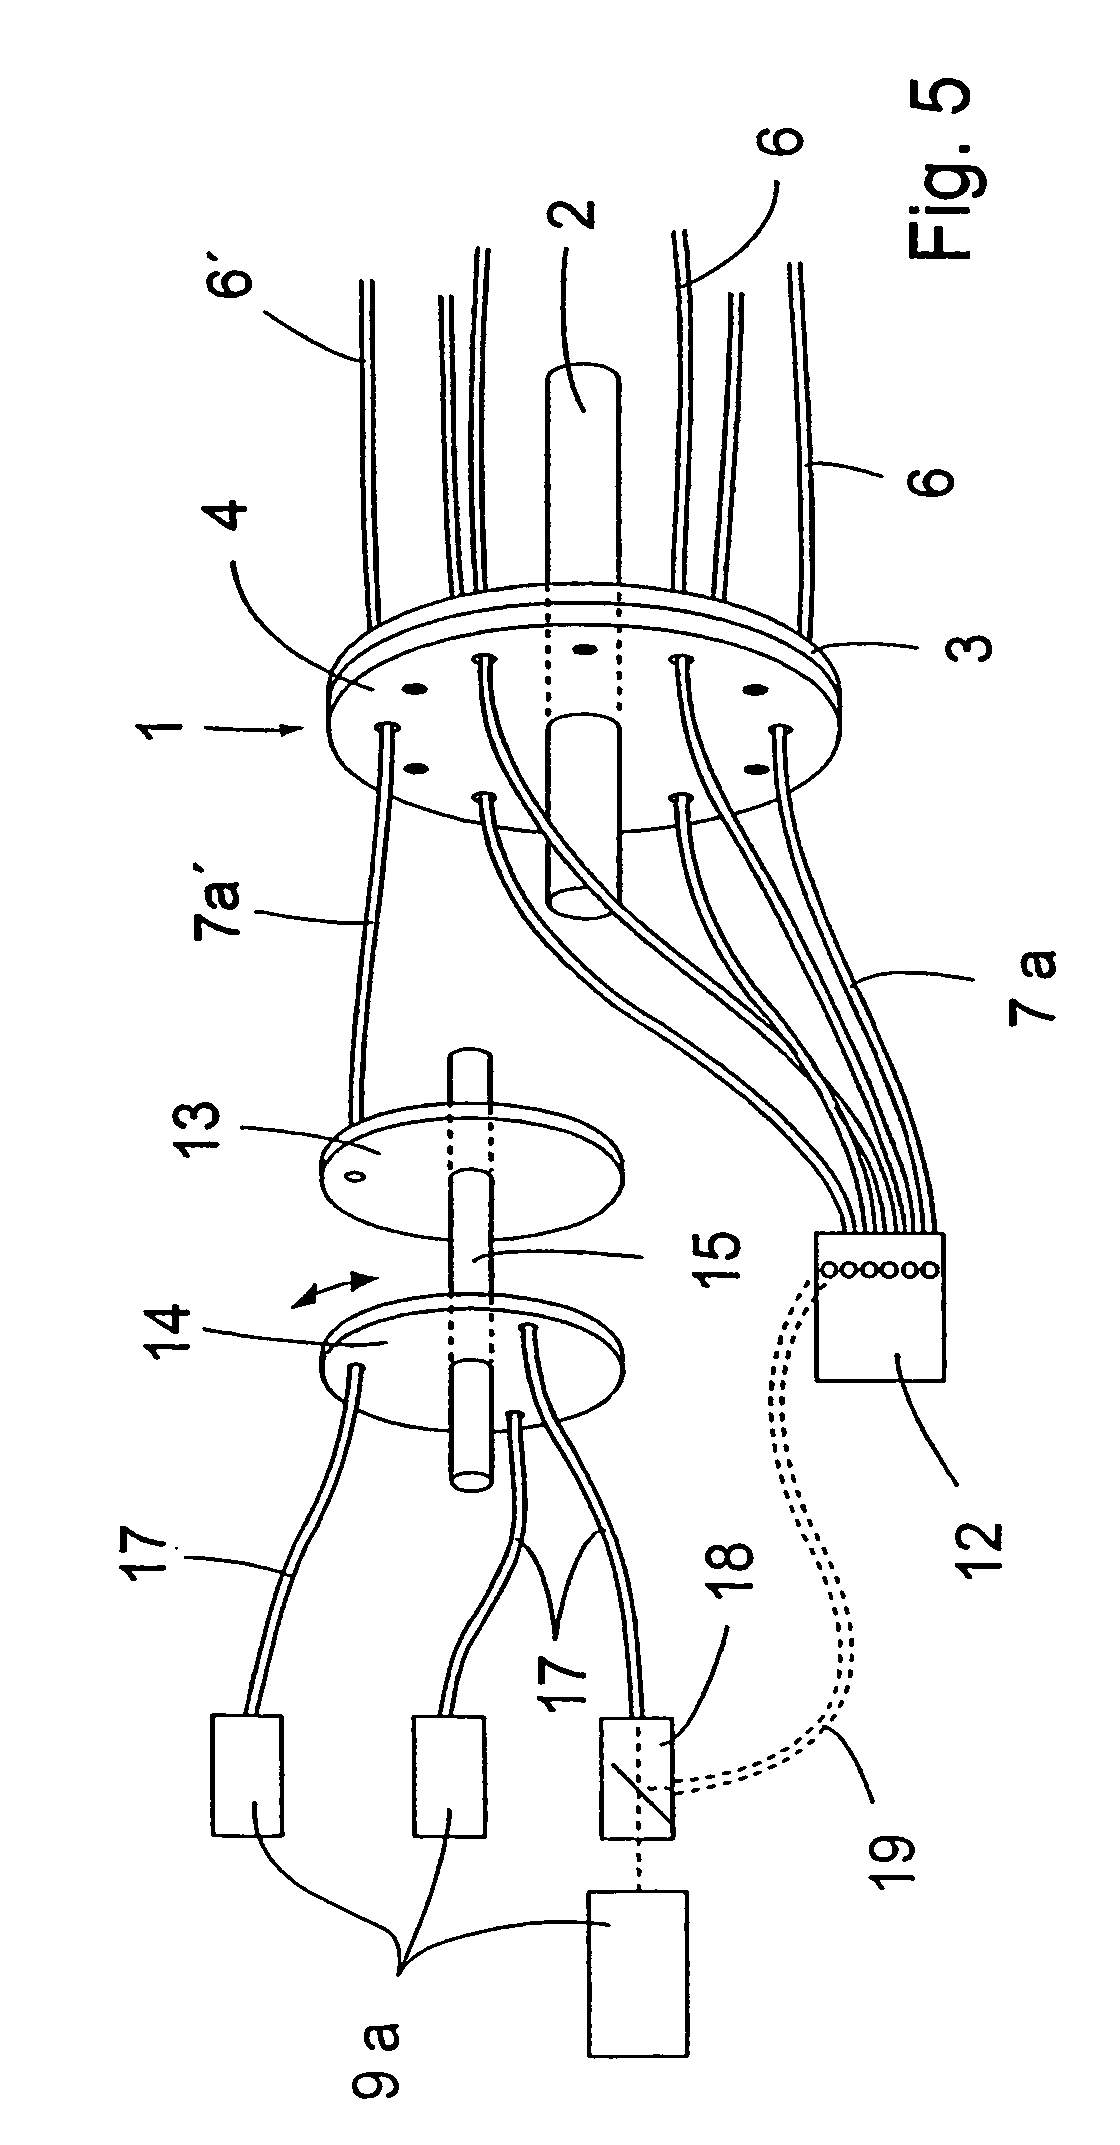 Therapy and diagnosis system and method with distributor for distribution of radiation